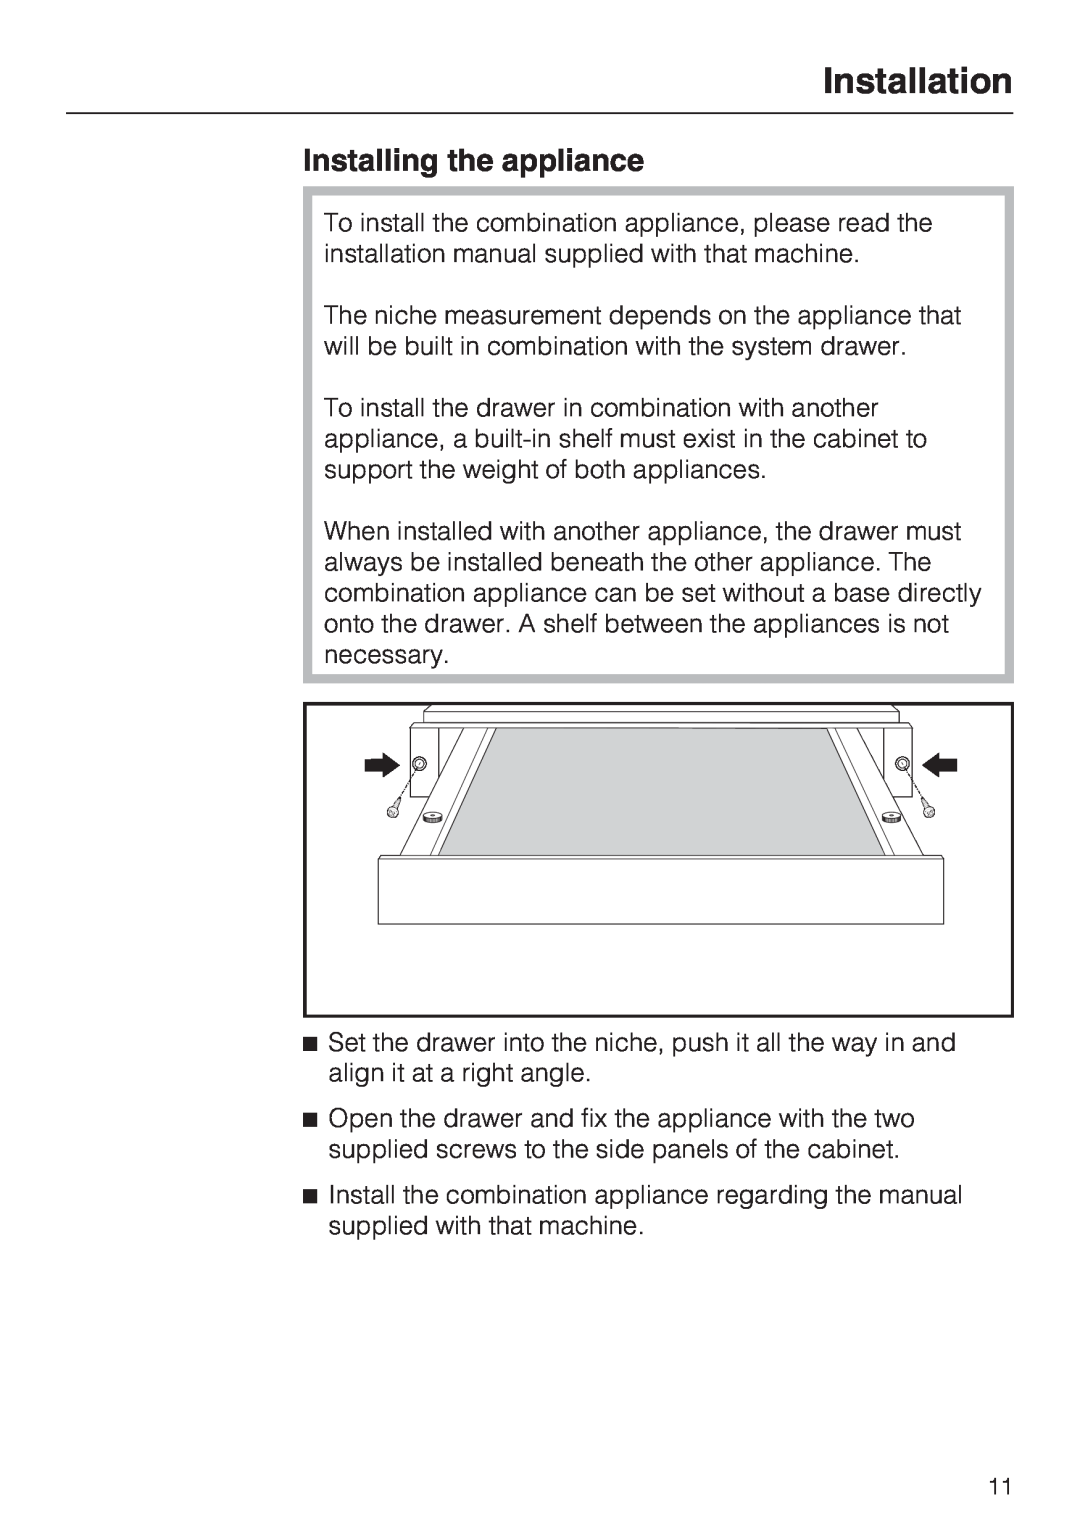 Miele ESS 2062 installation instructions Installing the appliance, Installation 